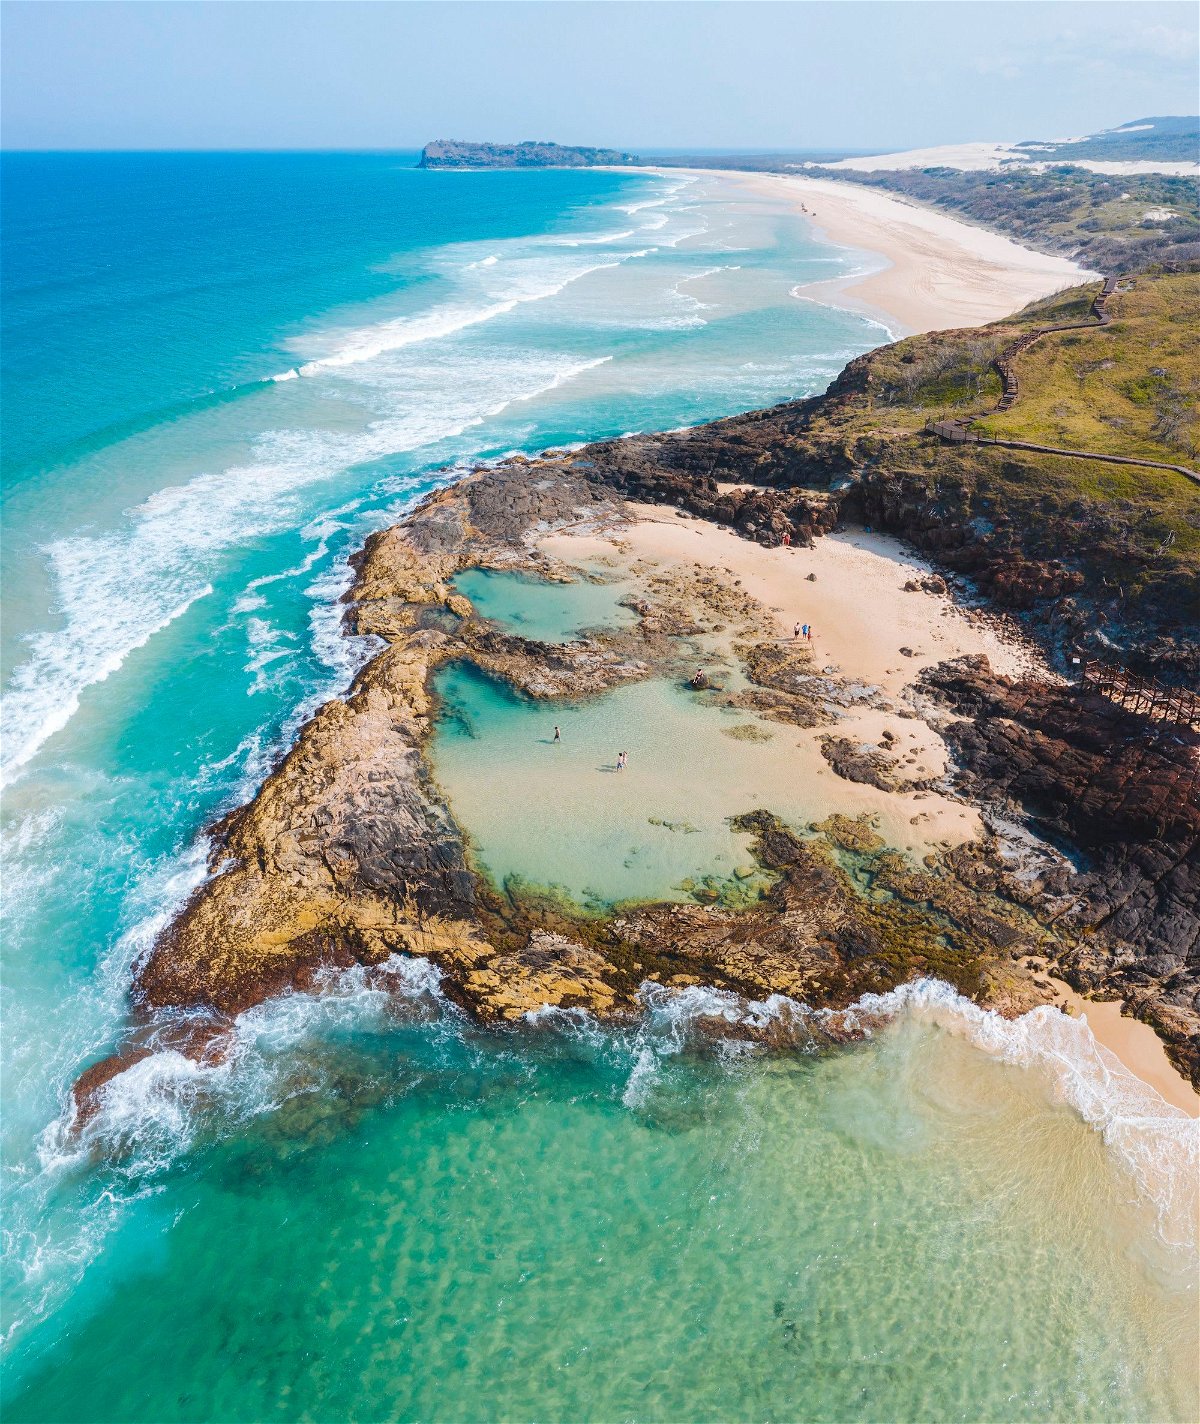 <i>Reuben Nutt/Tourism and Events Queensland</i><br/>The island's famous Champagne Pools decorate its 75-mile beach.